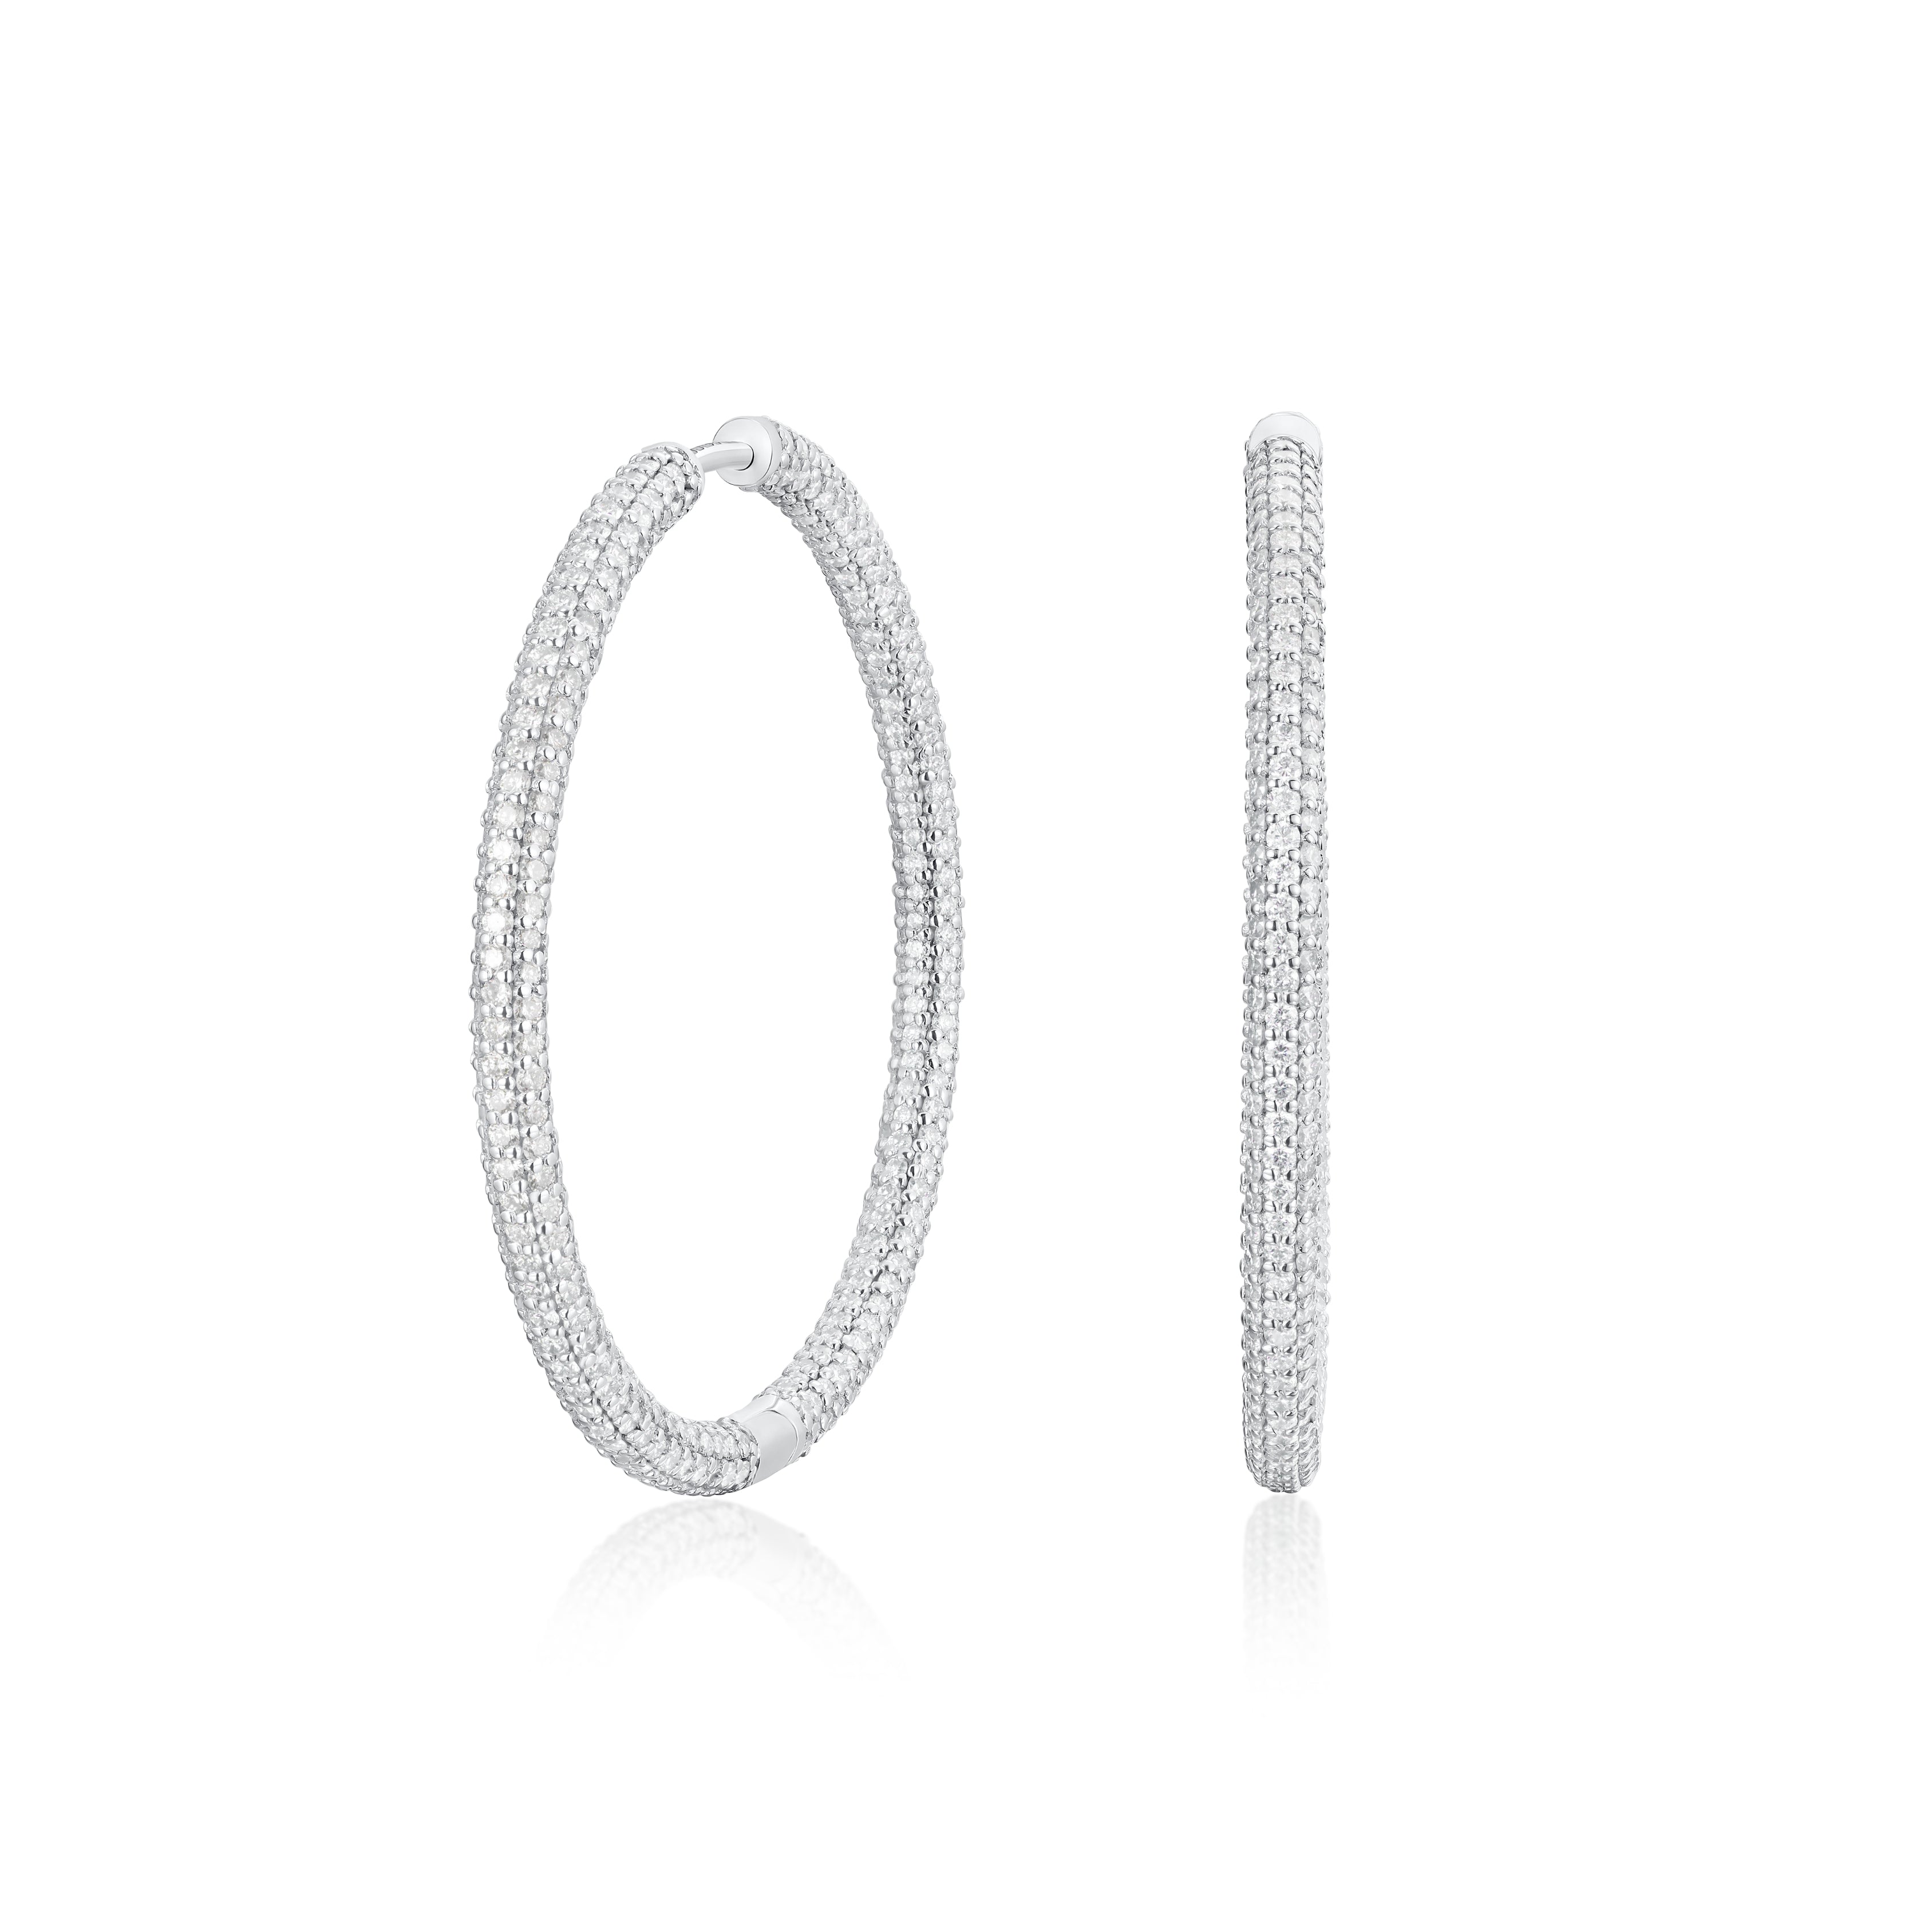 5.98cts Pave-Set 18ct White Gold Hoop Earrings